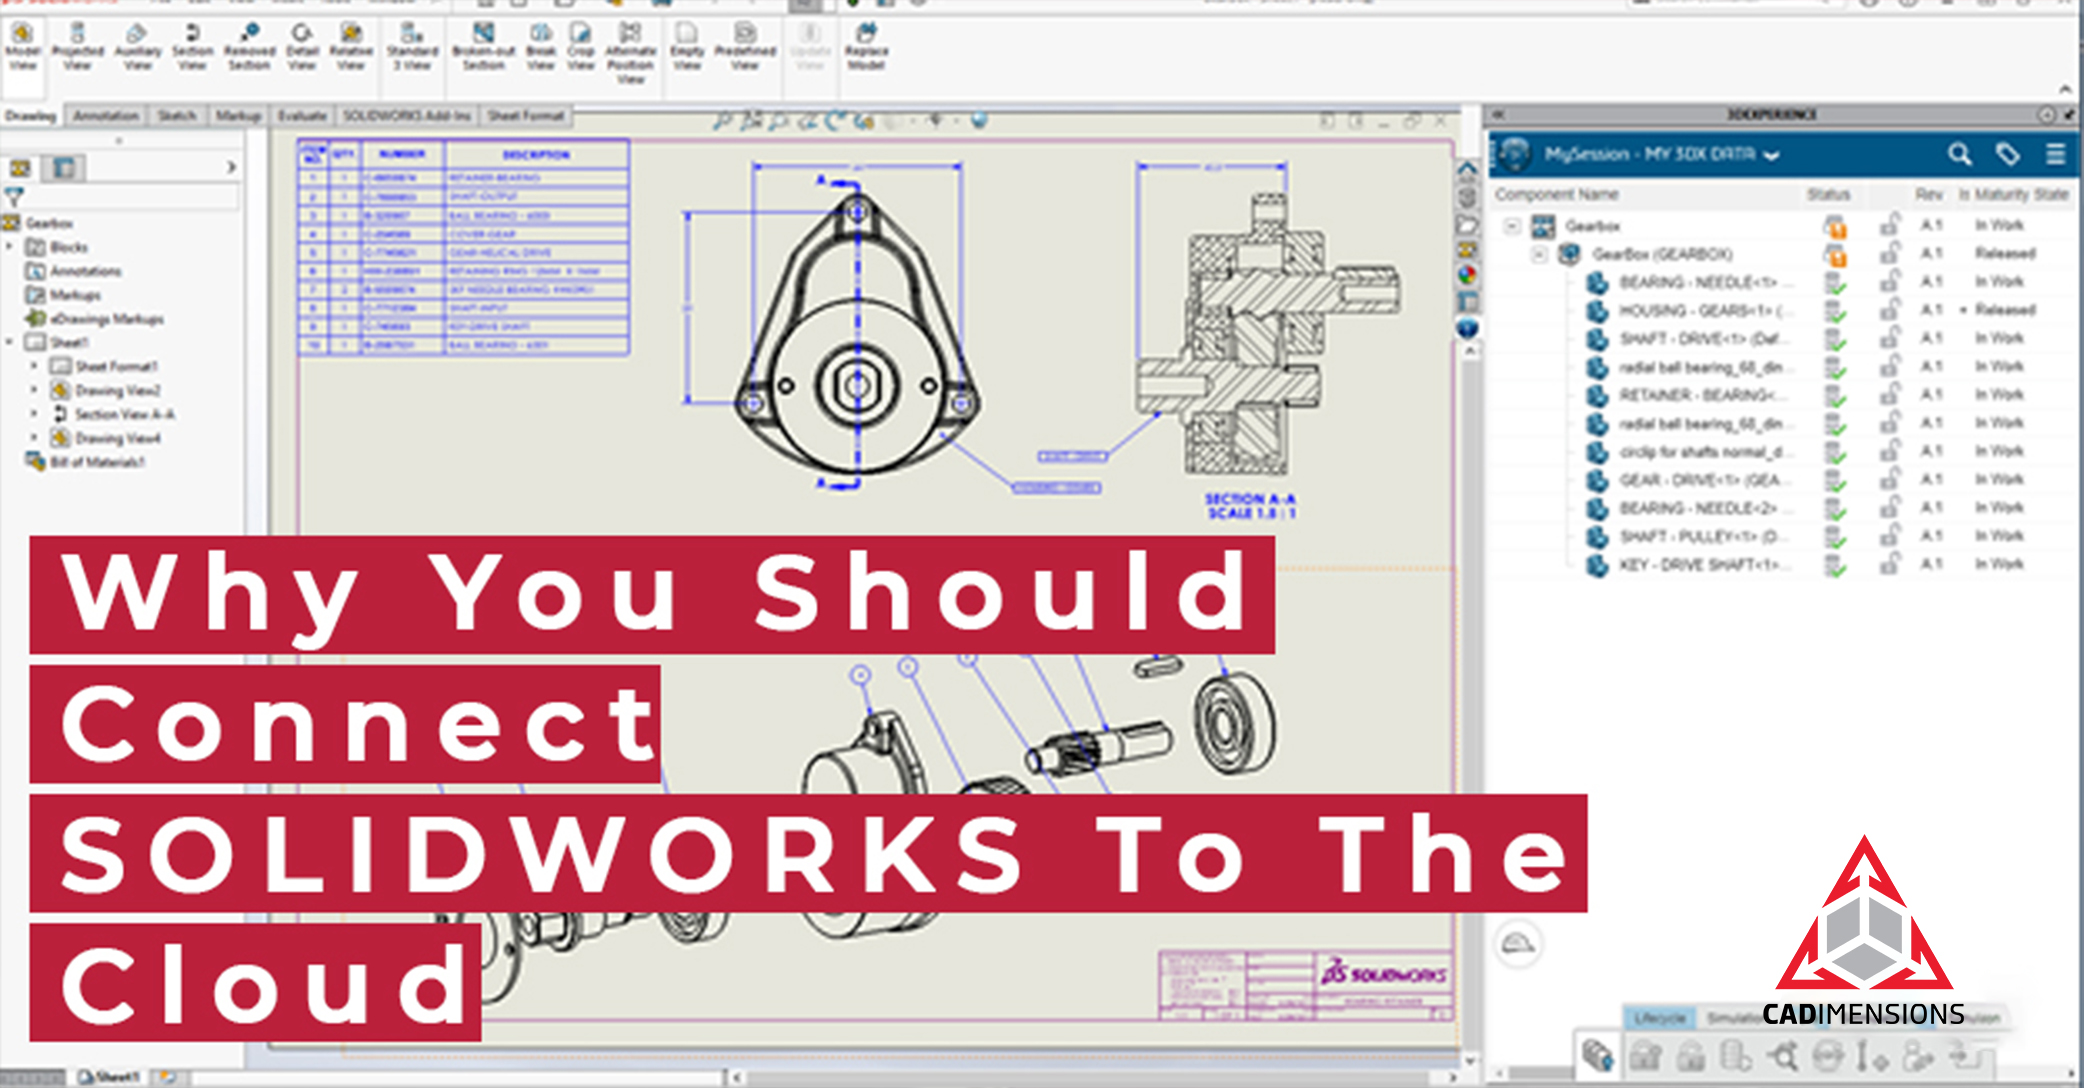 Now Is The Time To Connect SOLIDWORKS To The Cloud